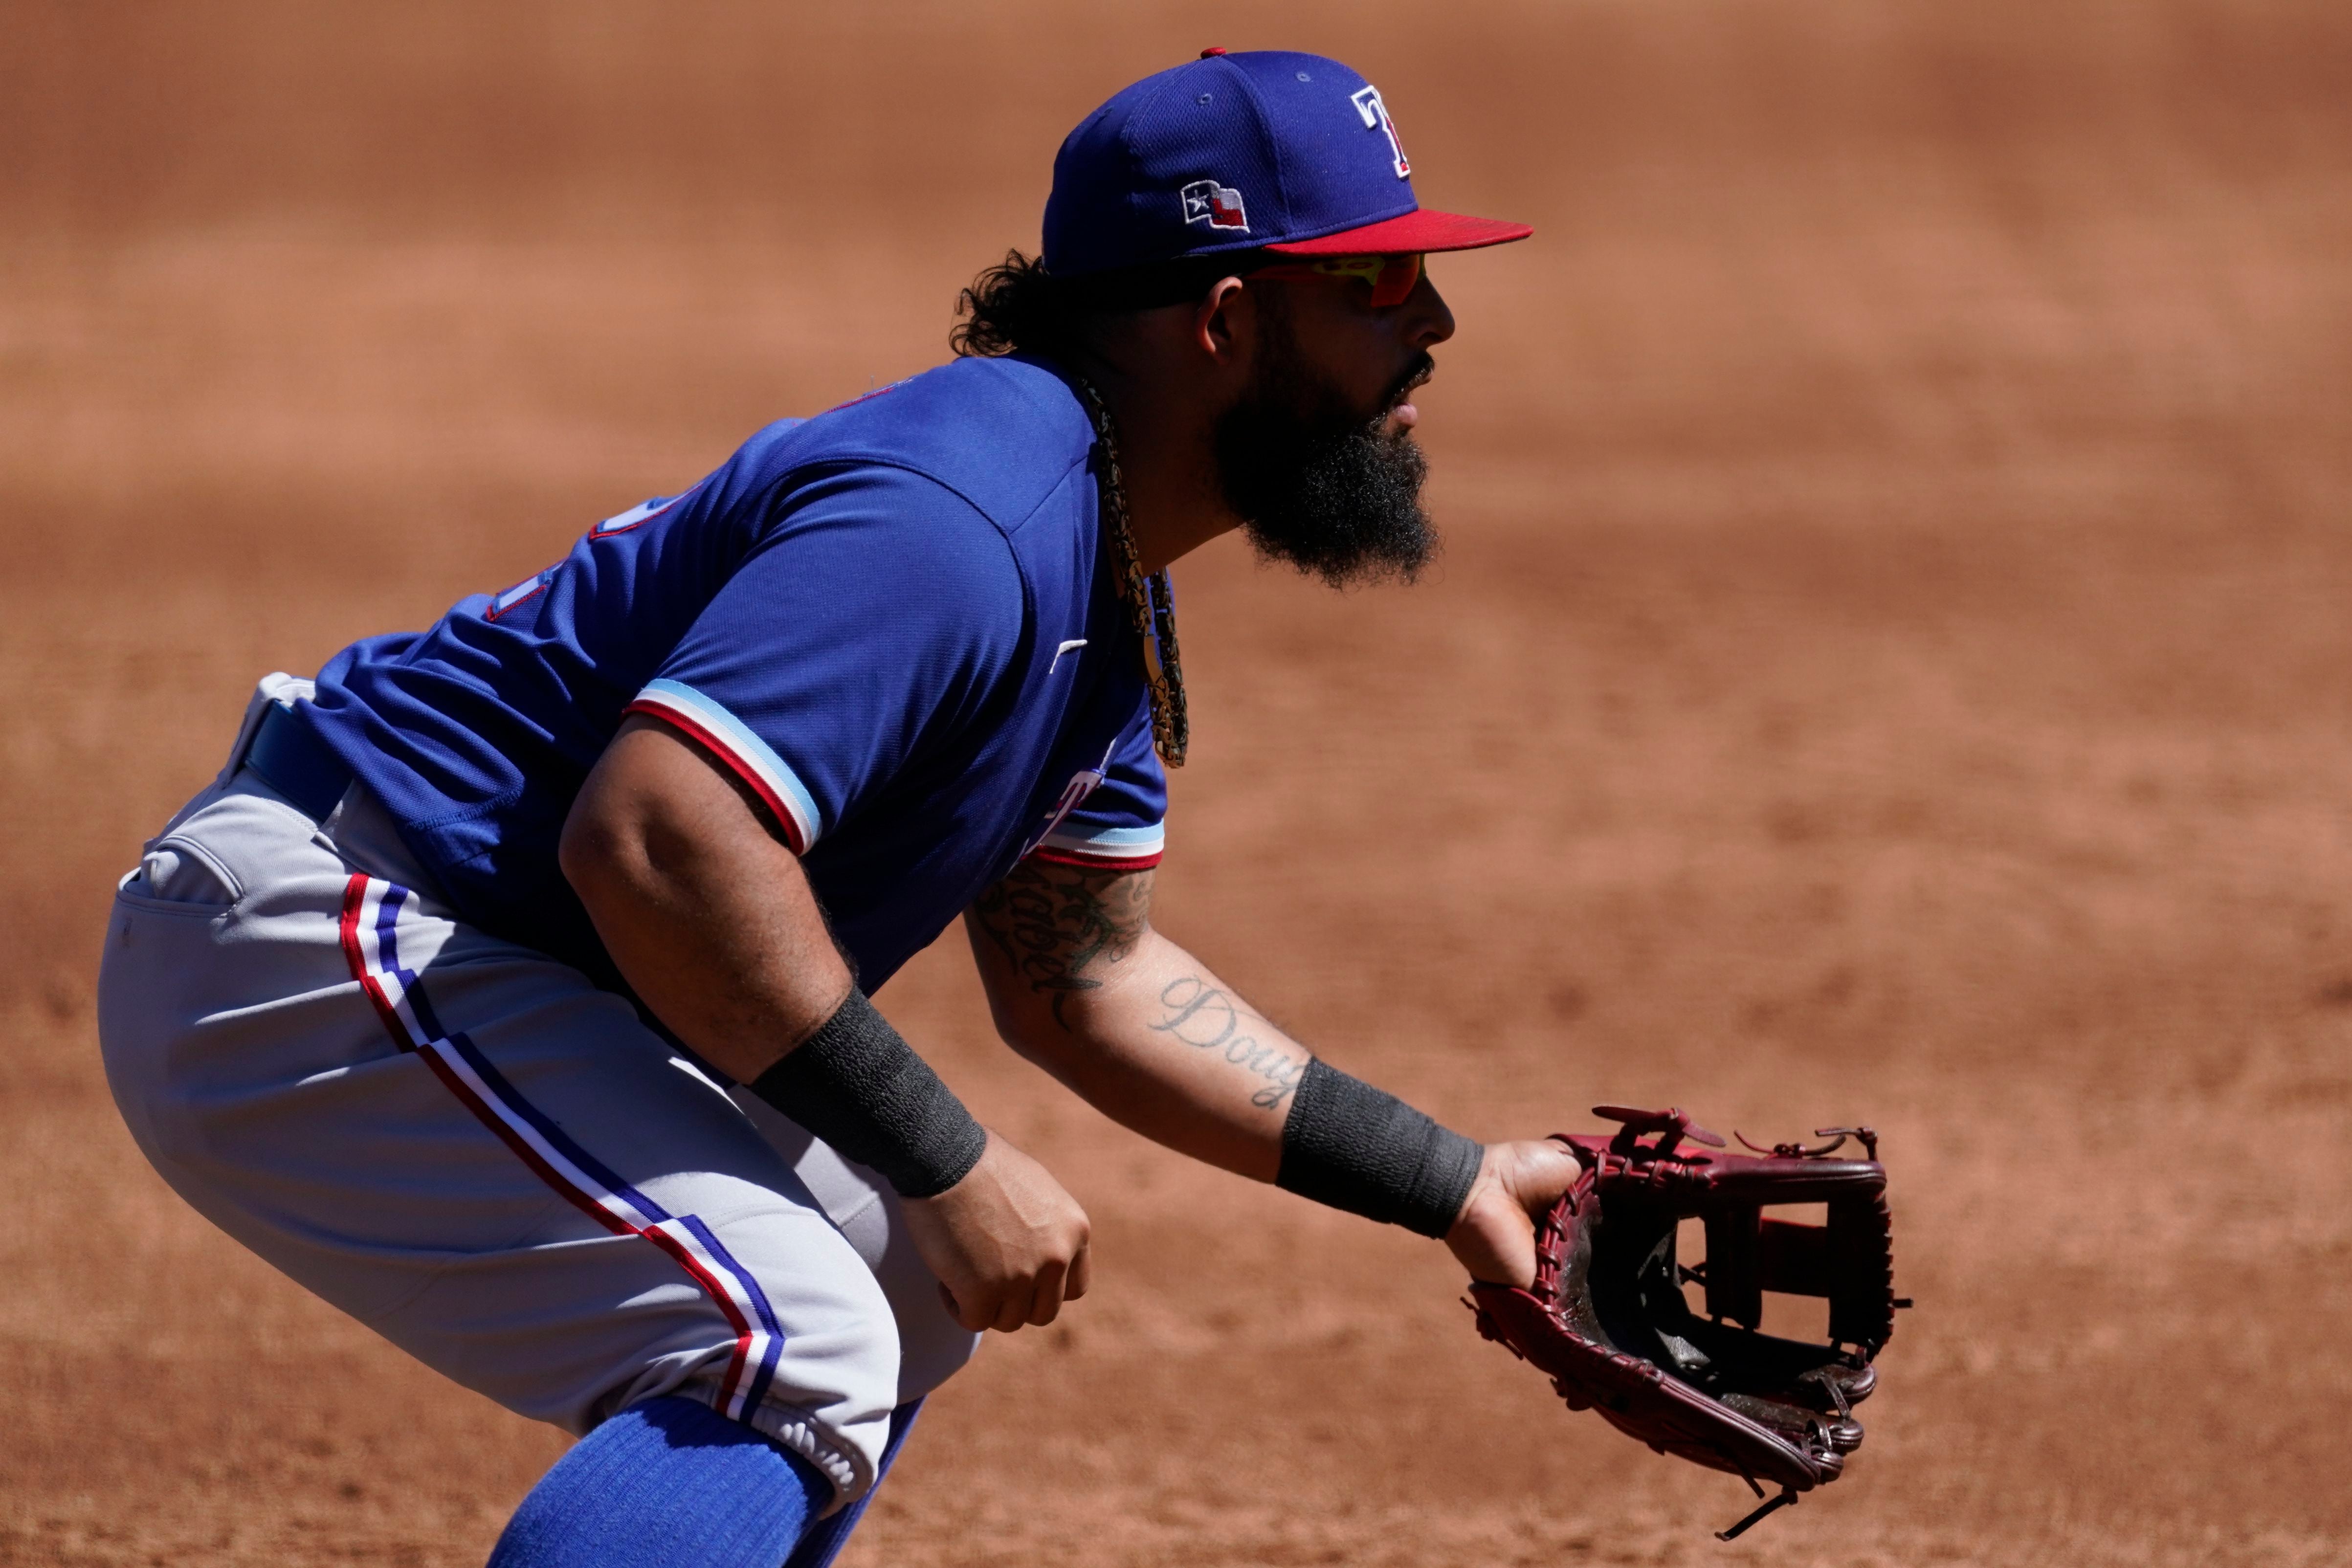 Yankees' Rougned Odor dissed by 3-year-old daughter after shaving